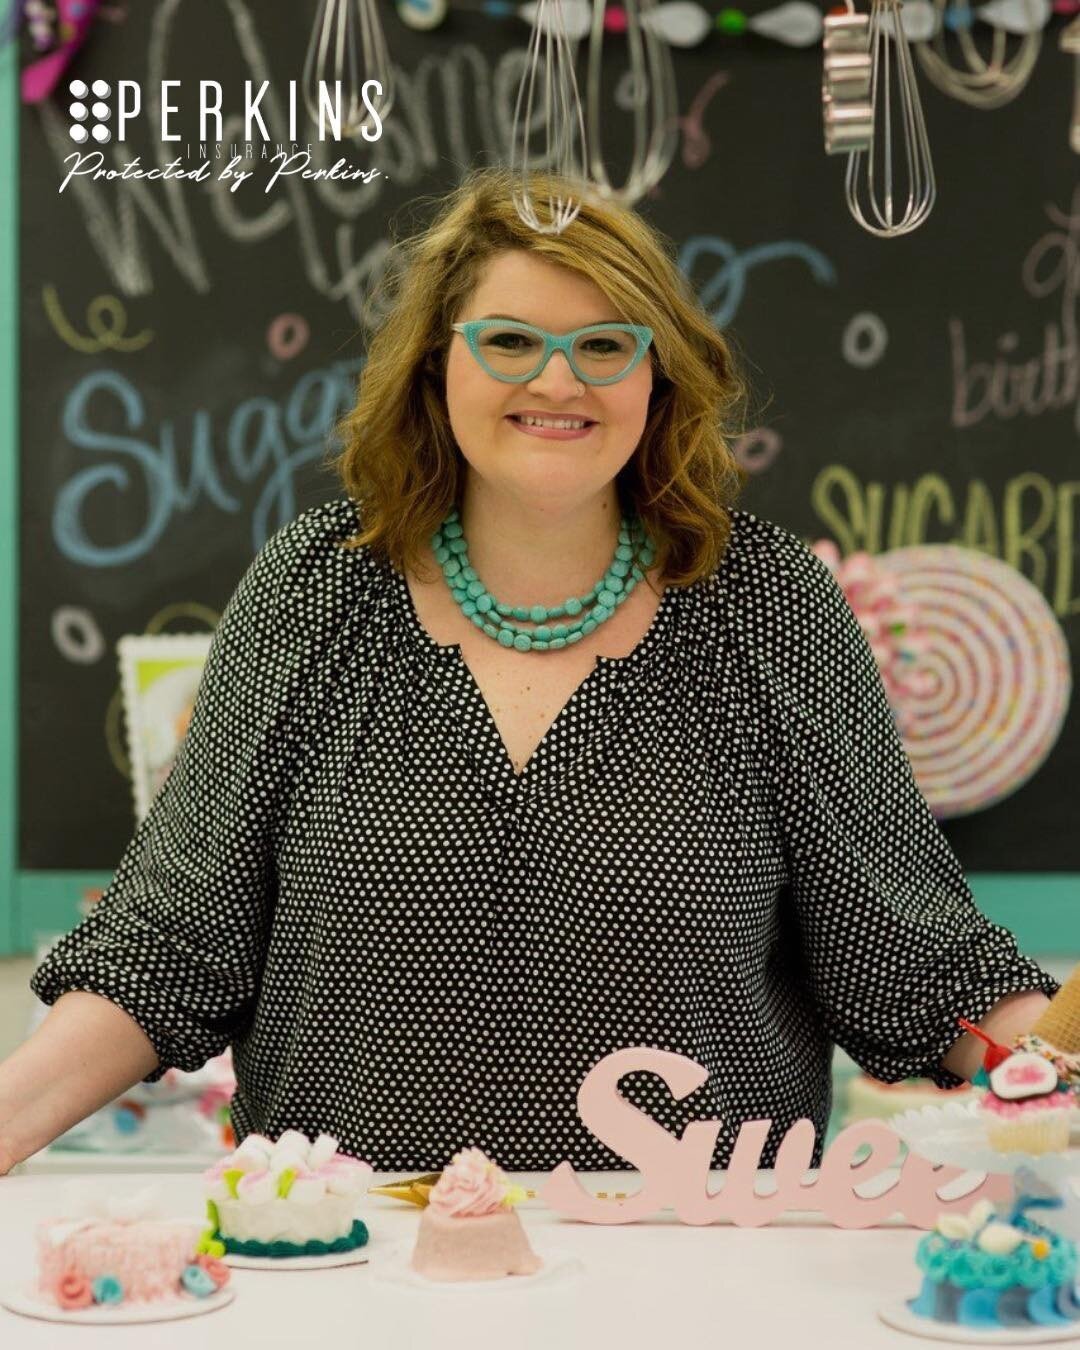 &ldquo;As a small business owner, I knew I had to have the best possible coverage at the best possible price. Perkins made it insanely easy to do both.&quot; - Brooke O. | Nashville, TN - Business Policy Holder | Sugar Drop Dessert Boutique 

#protec